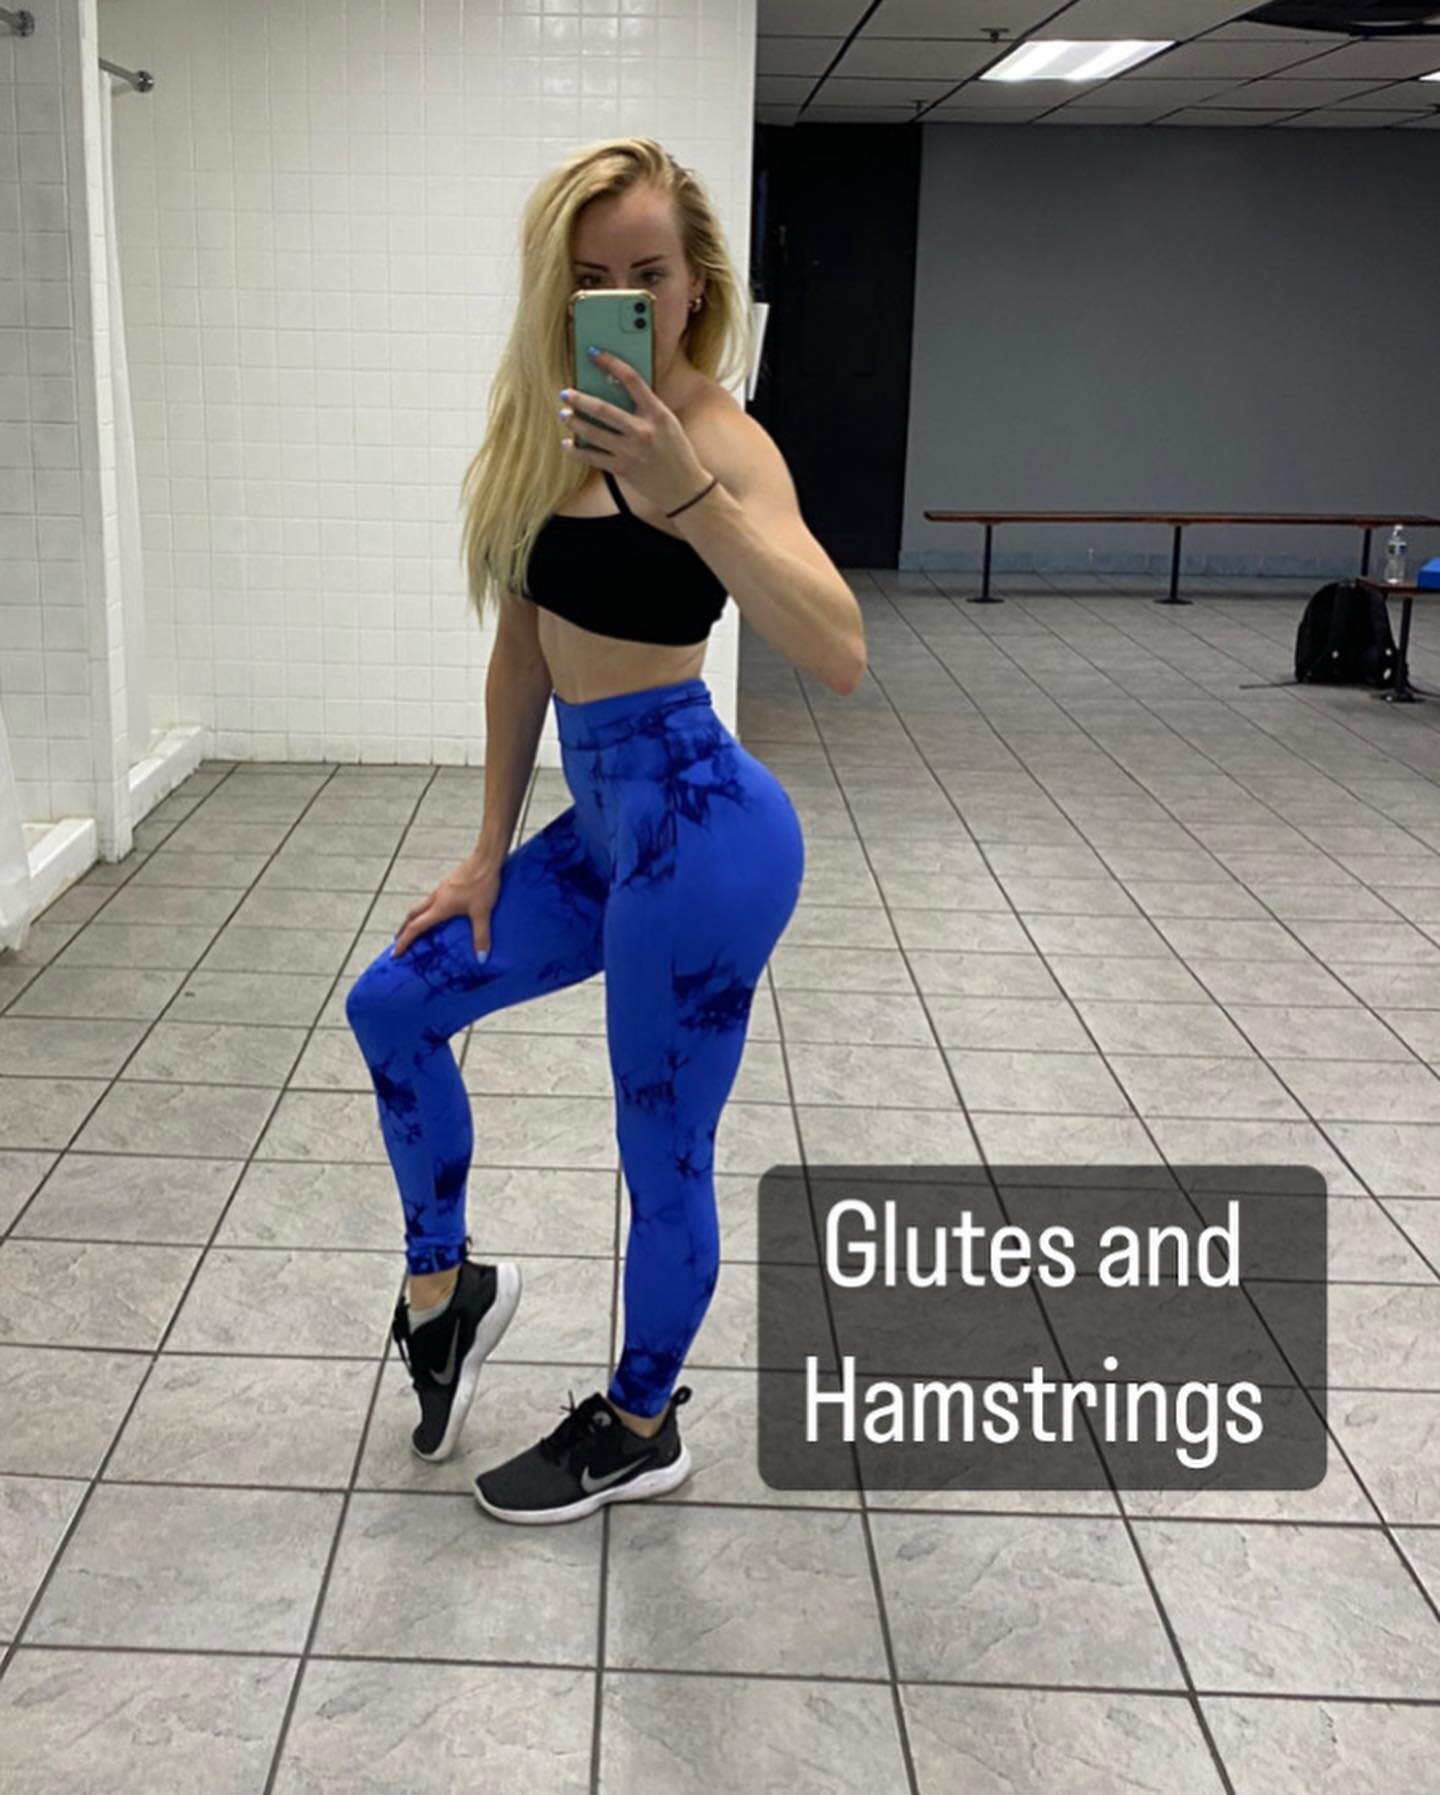 Let&rsquo;s hit some glutes and hammies!
Swipe ➡️💪🏻🍑
Hip Thrusts
Sumo Deadlifts 
RDLs
B-Stance RDL
Abductor 
Hamstring Curl
Cable Kickbacks
Reverse Hypers 

Outfit: @sheinofficial 

#sundayfunday #legdayworkout #legday #legdayeveryday #legdays #le